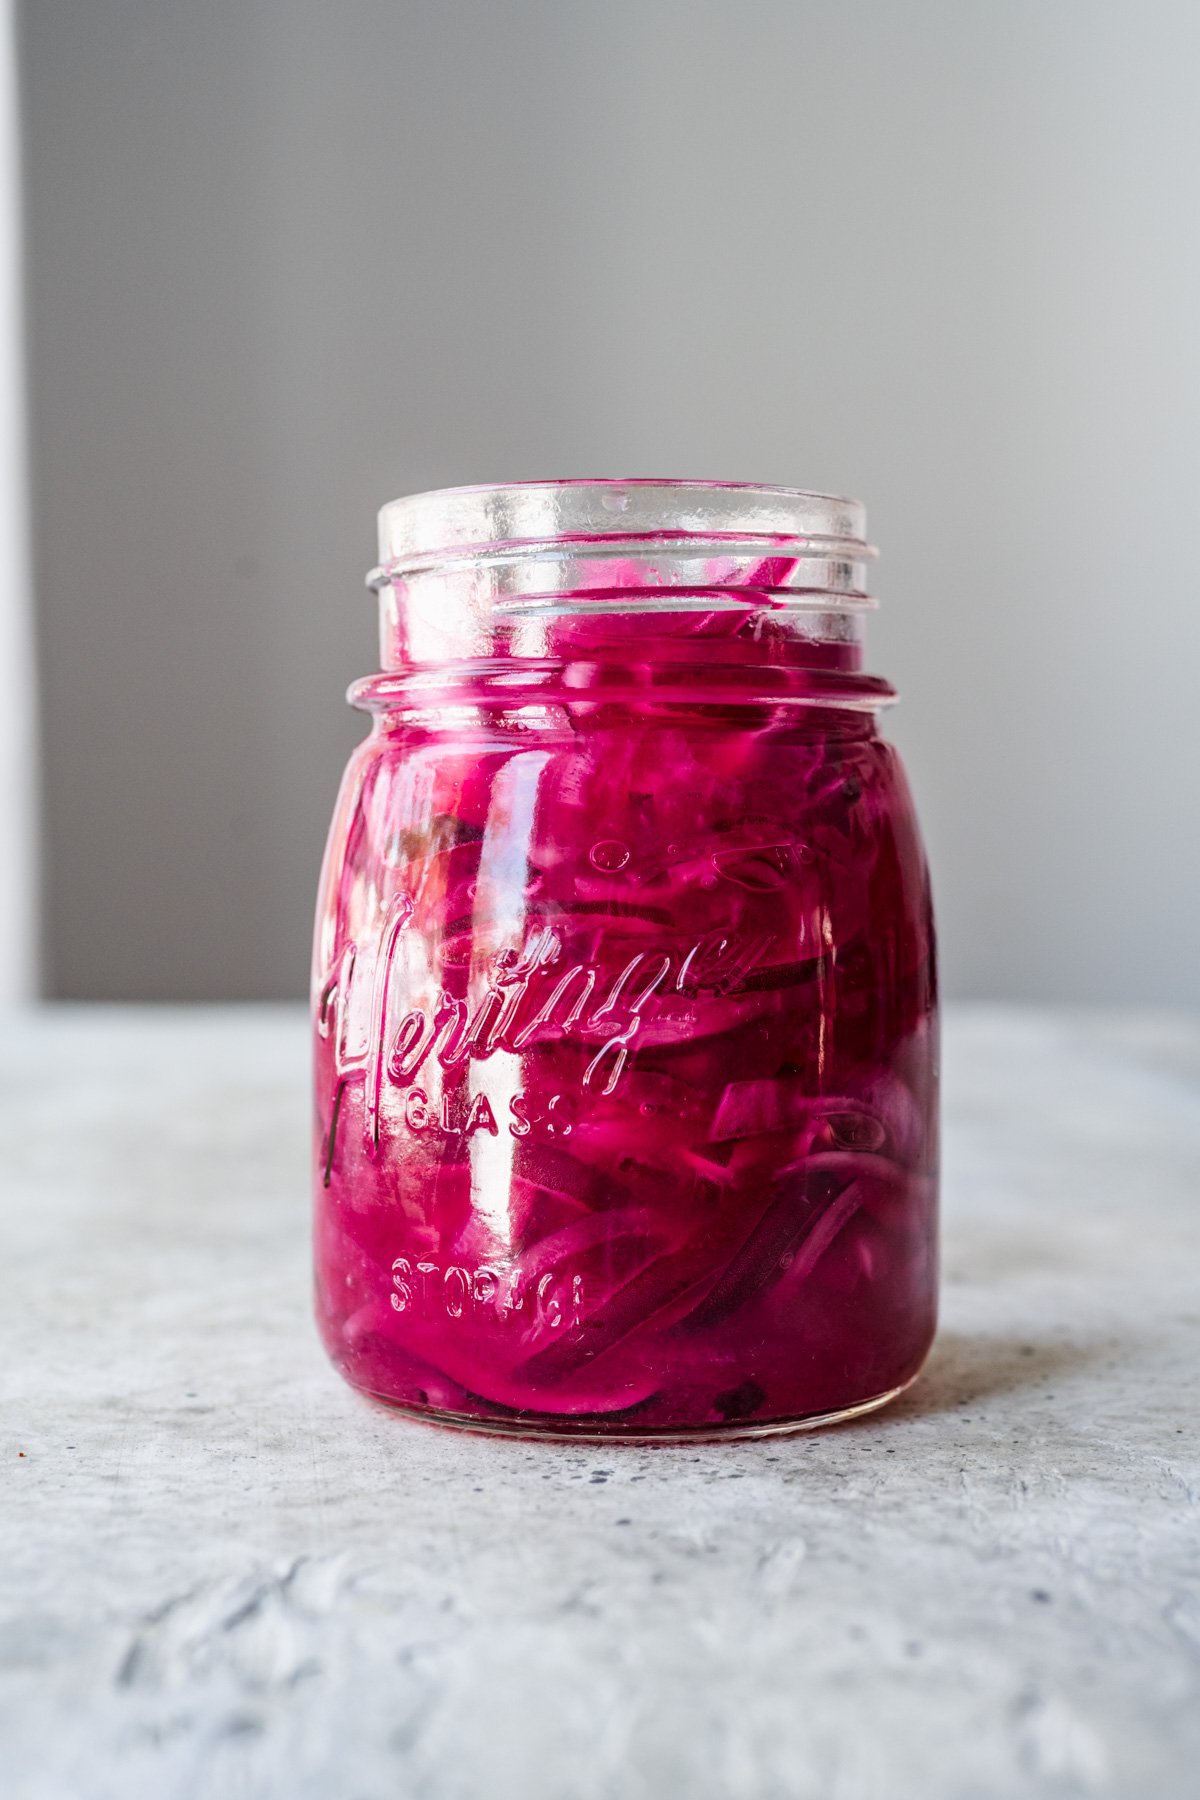 Front view of pickled red onions in a jar.